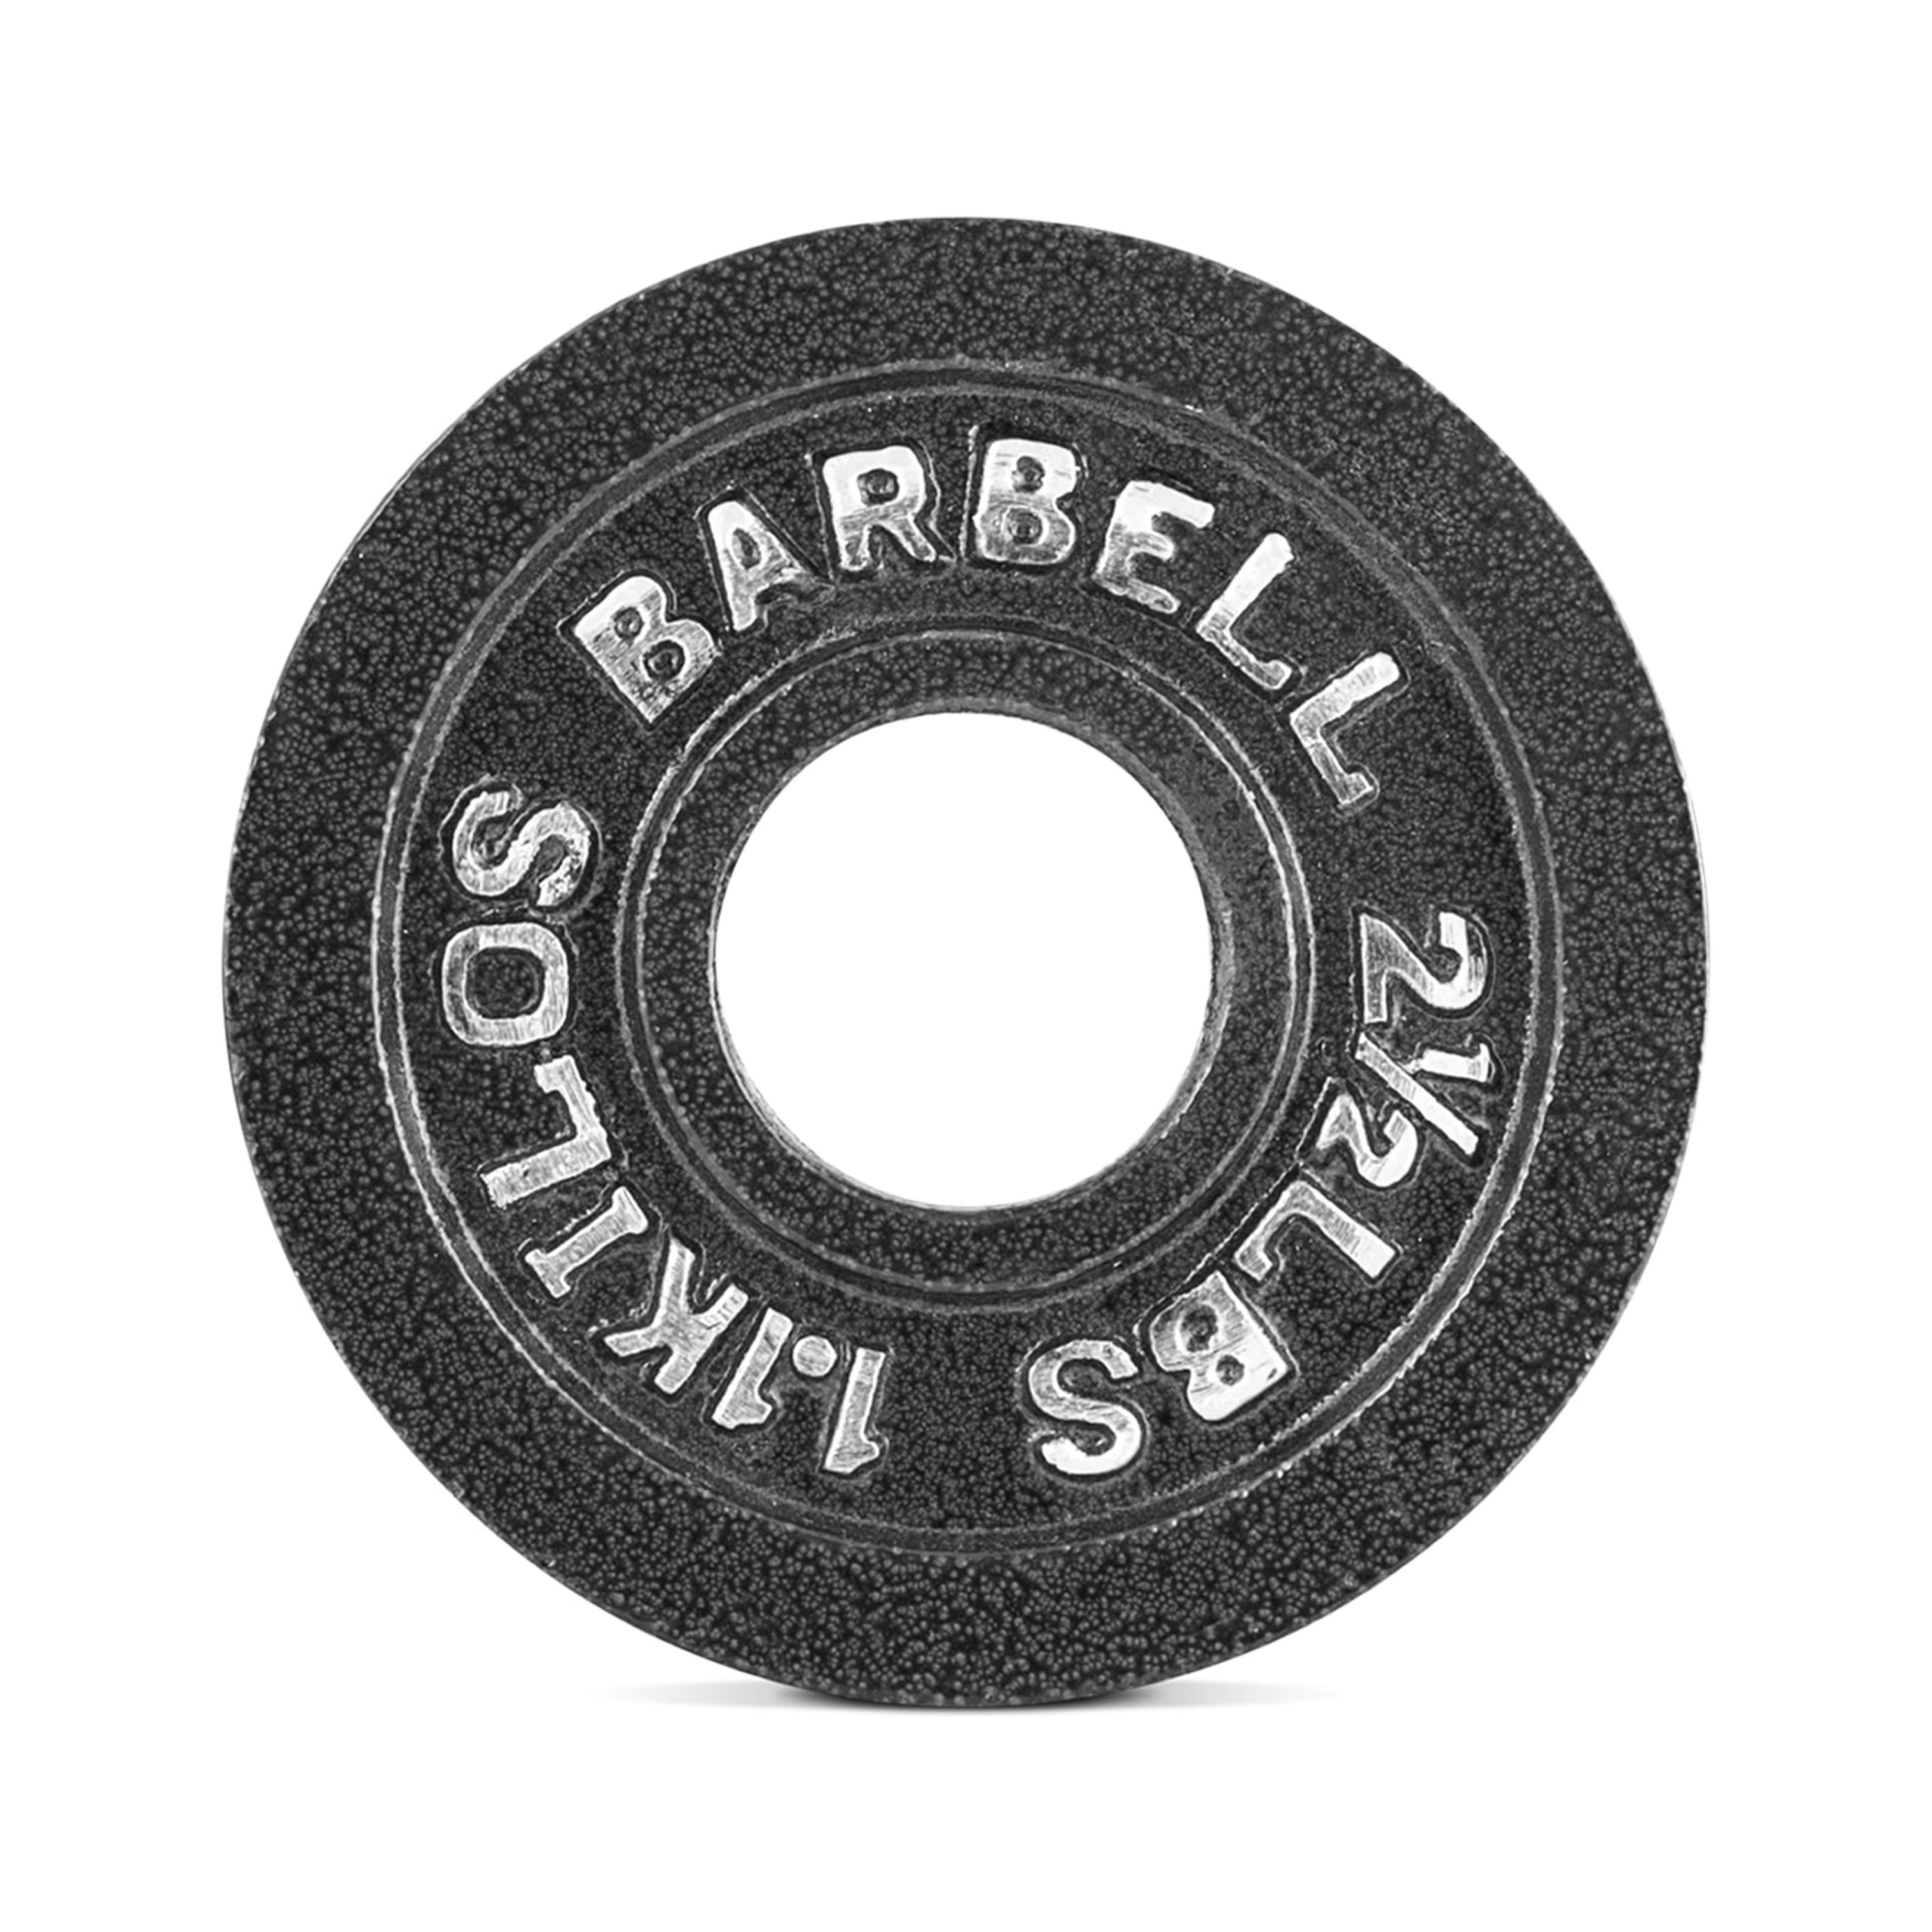 CAP Barbell Olympic Cast Iron Plate, 2.5-100 Lbs., Single - image 1 of 3